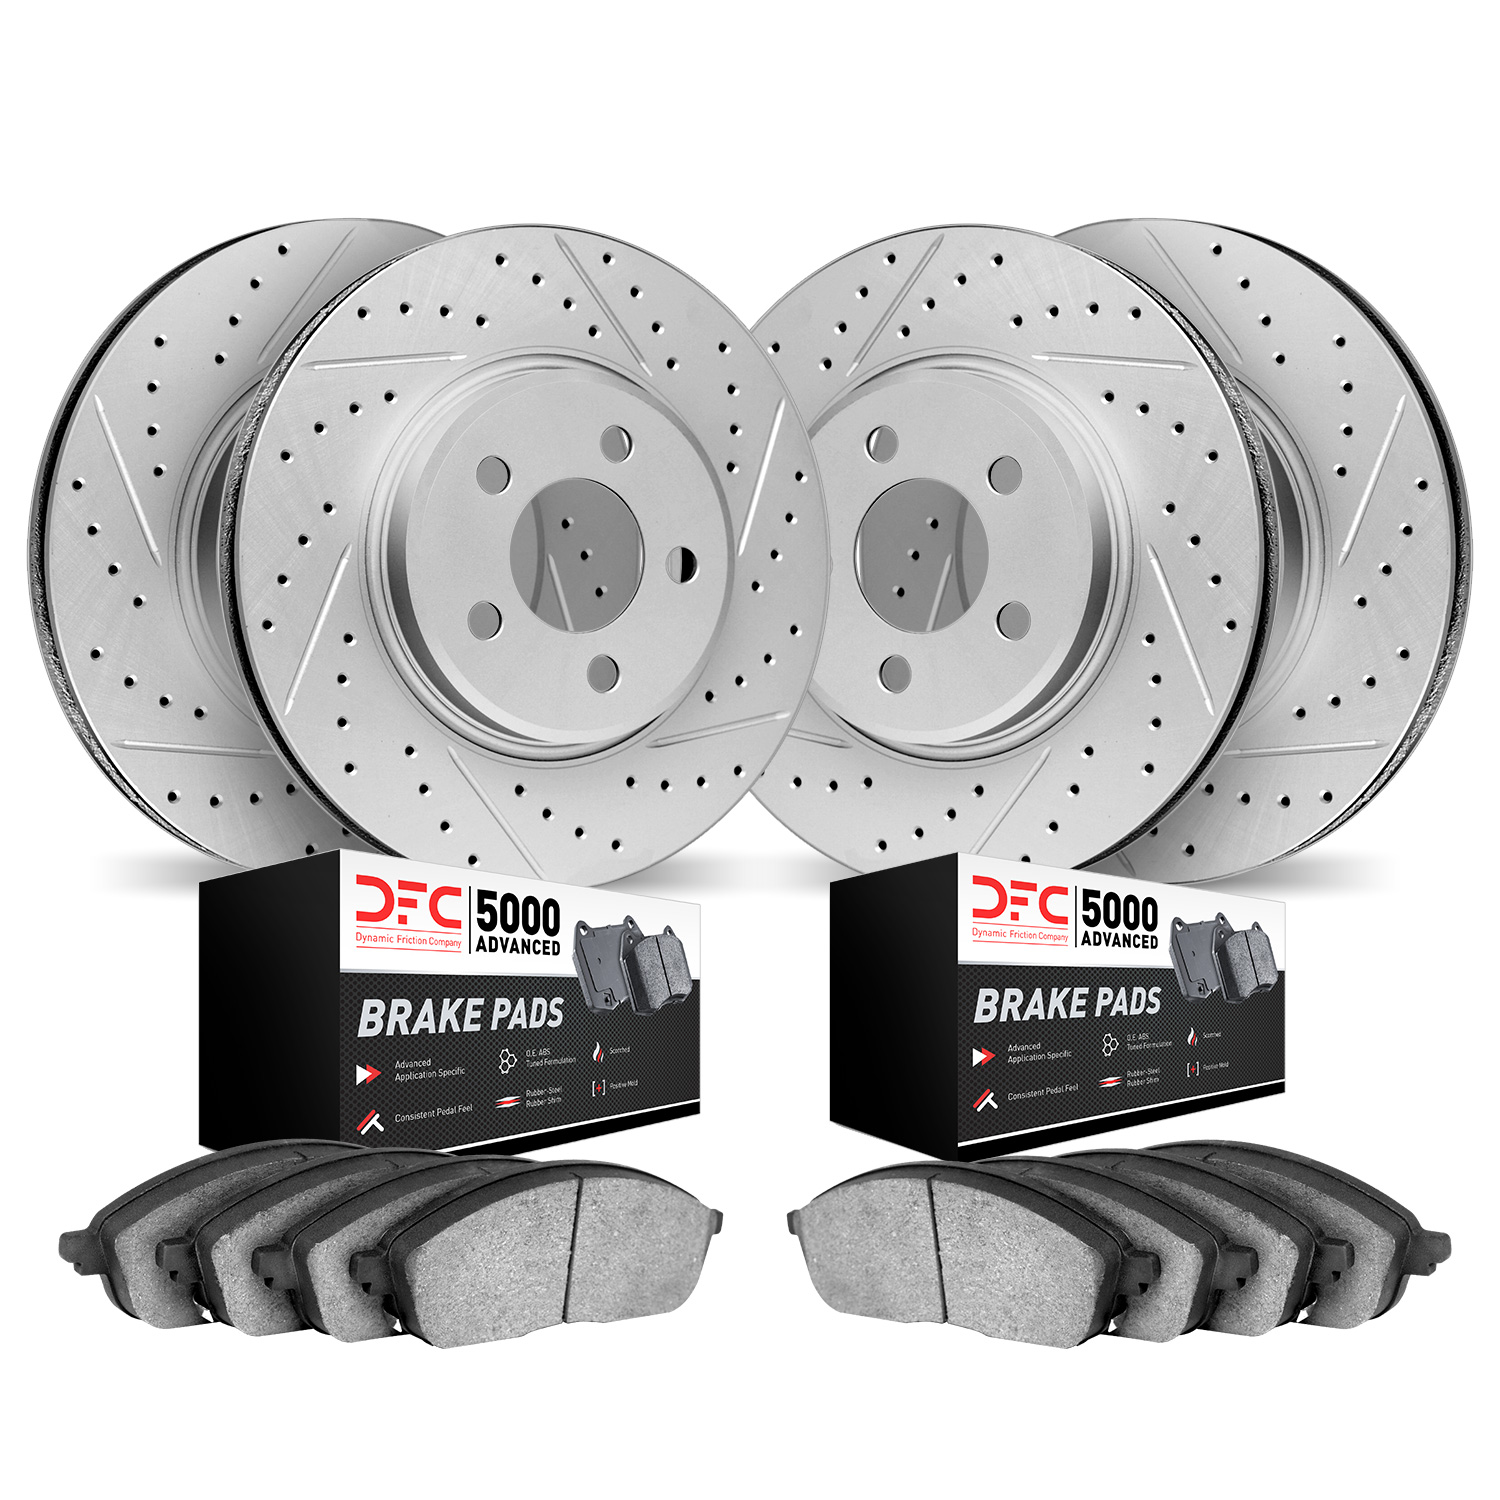 2504-11010 Geoperformance Drilled/Slotted Rotors w/5000 Advanced Brake Pads Kit, 2006-2009 Land Rover, Position: Front and Rear